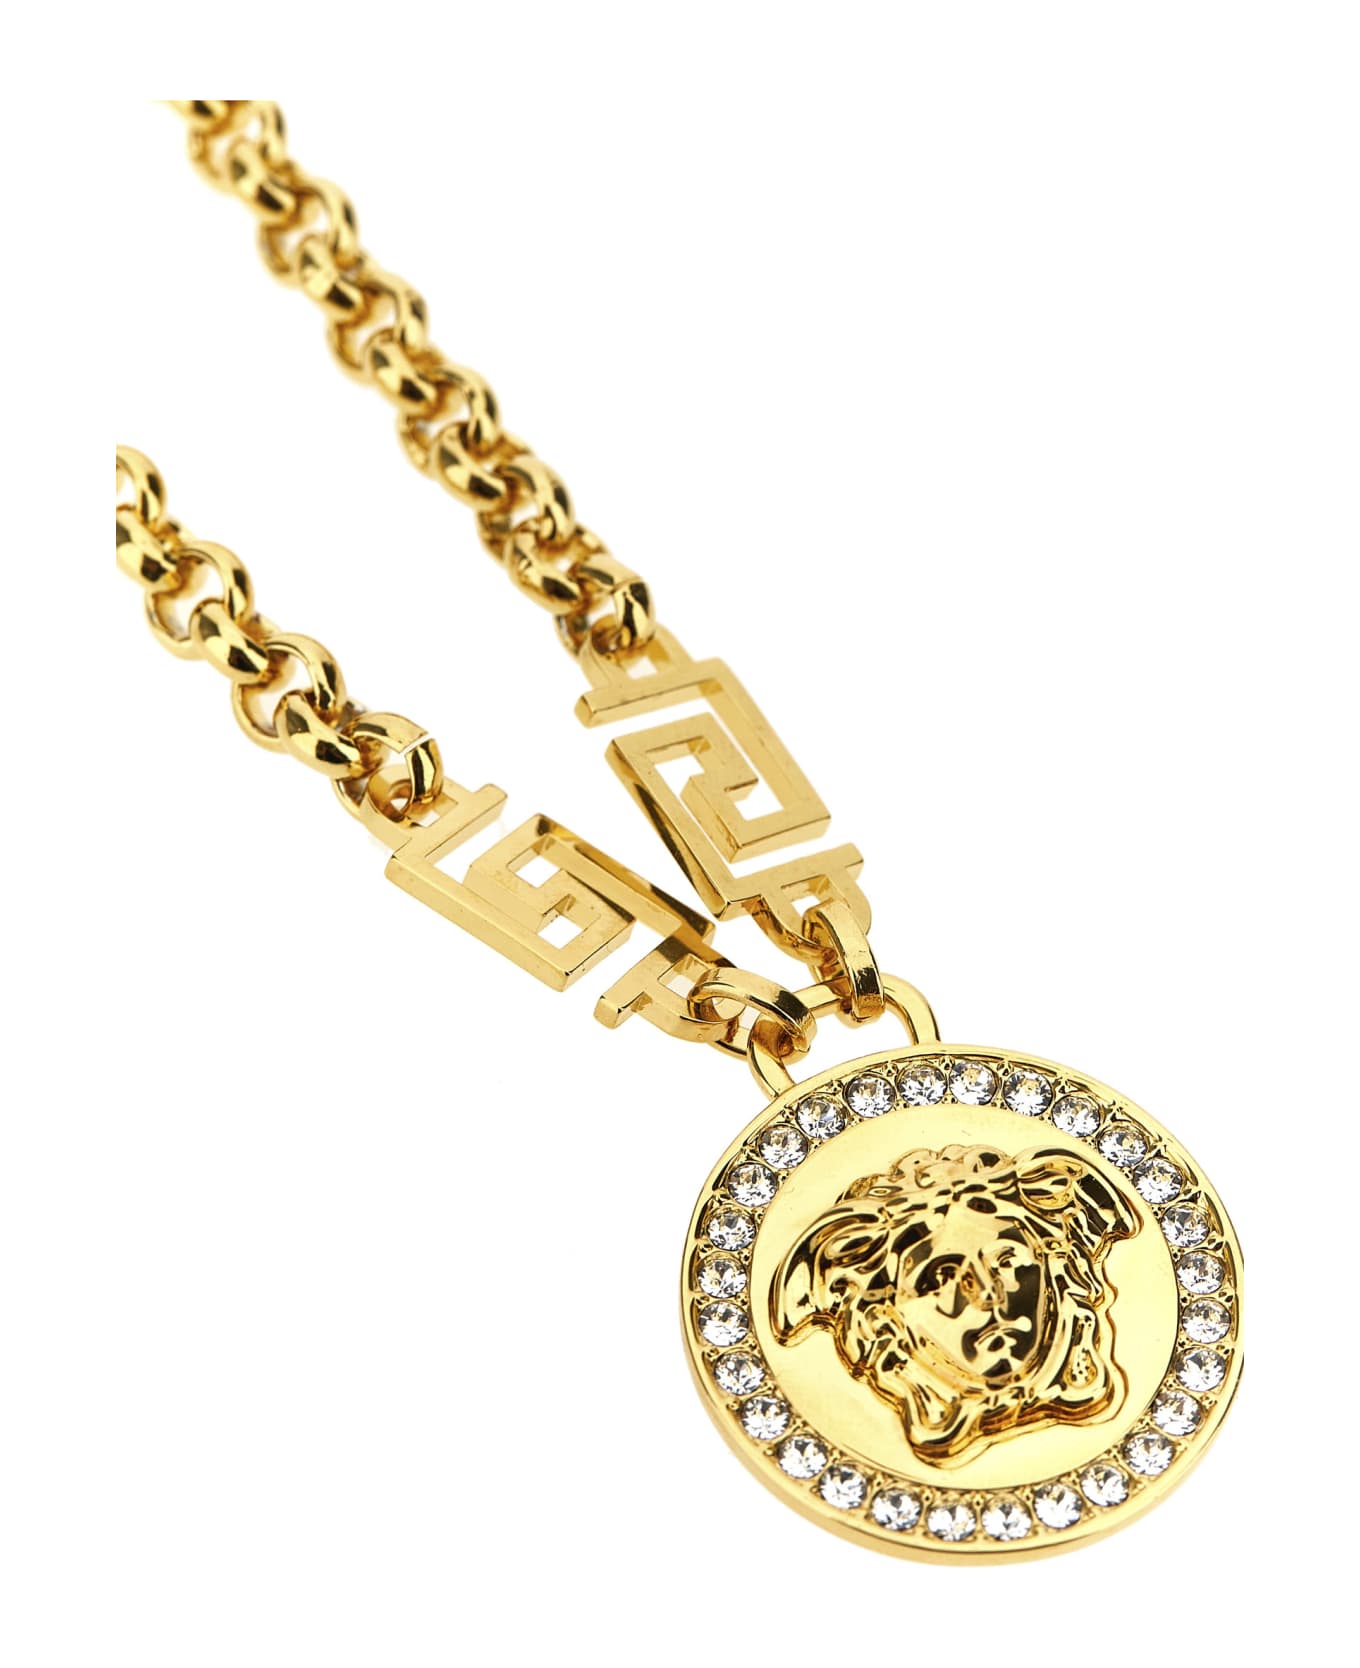 Versace 'medusa' Necklace - O White Gold ネックレス